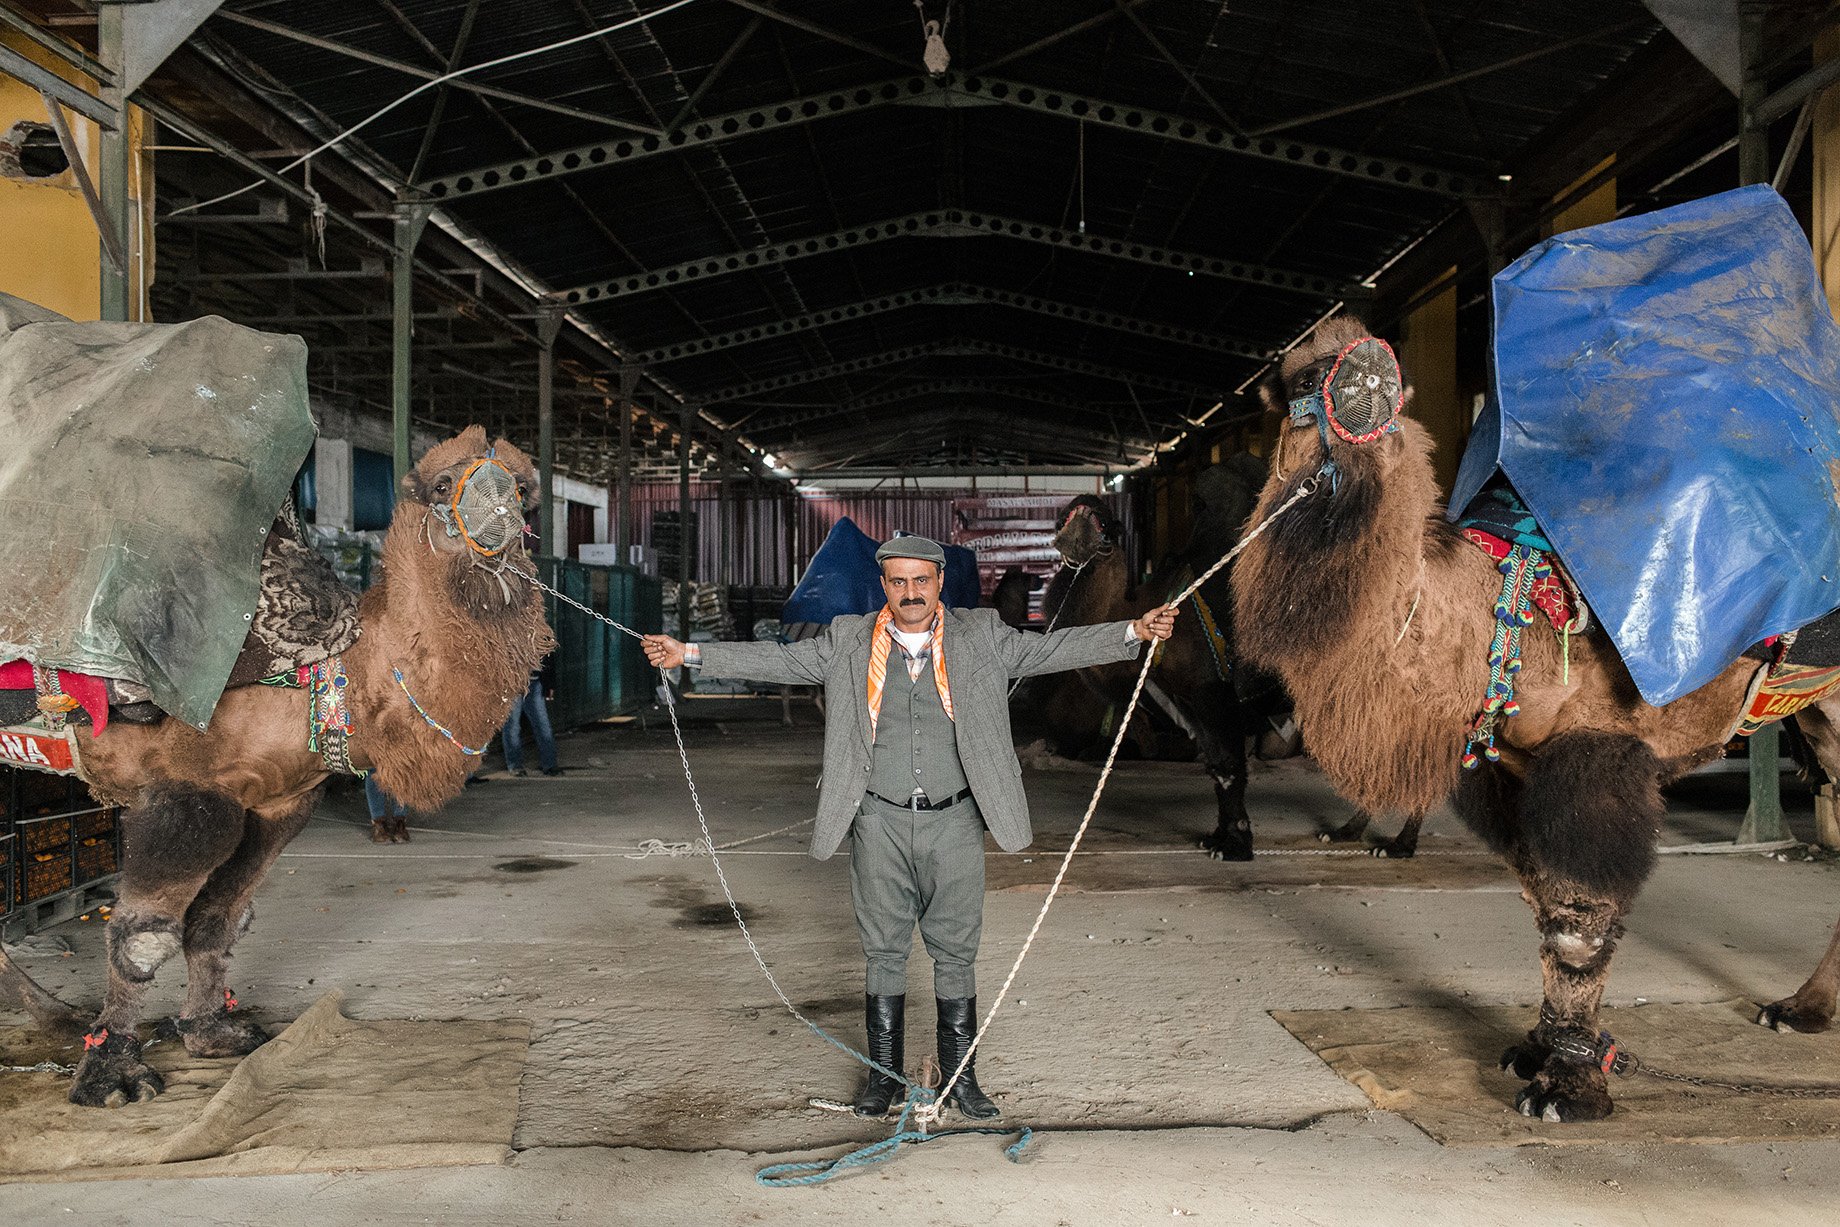 Camel trainer holds two camels in wear house where he keeps them safe prior to the event. Shot by Bradley Secker featured in the New York Times.